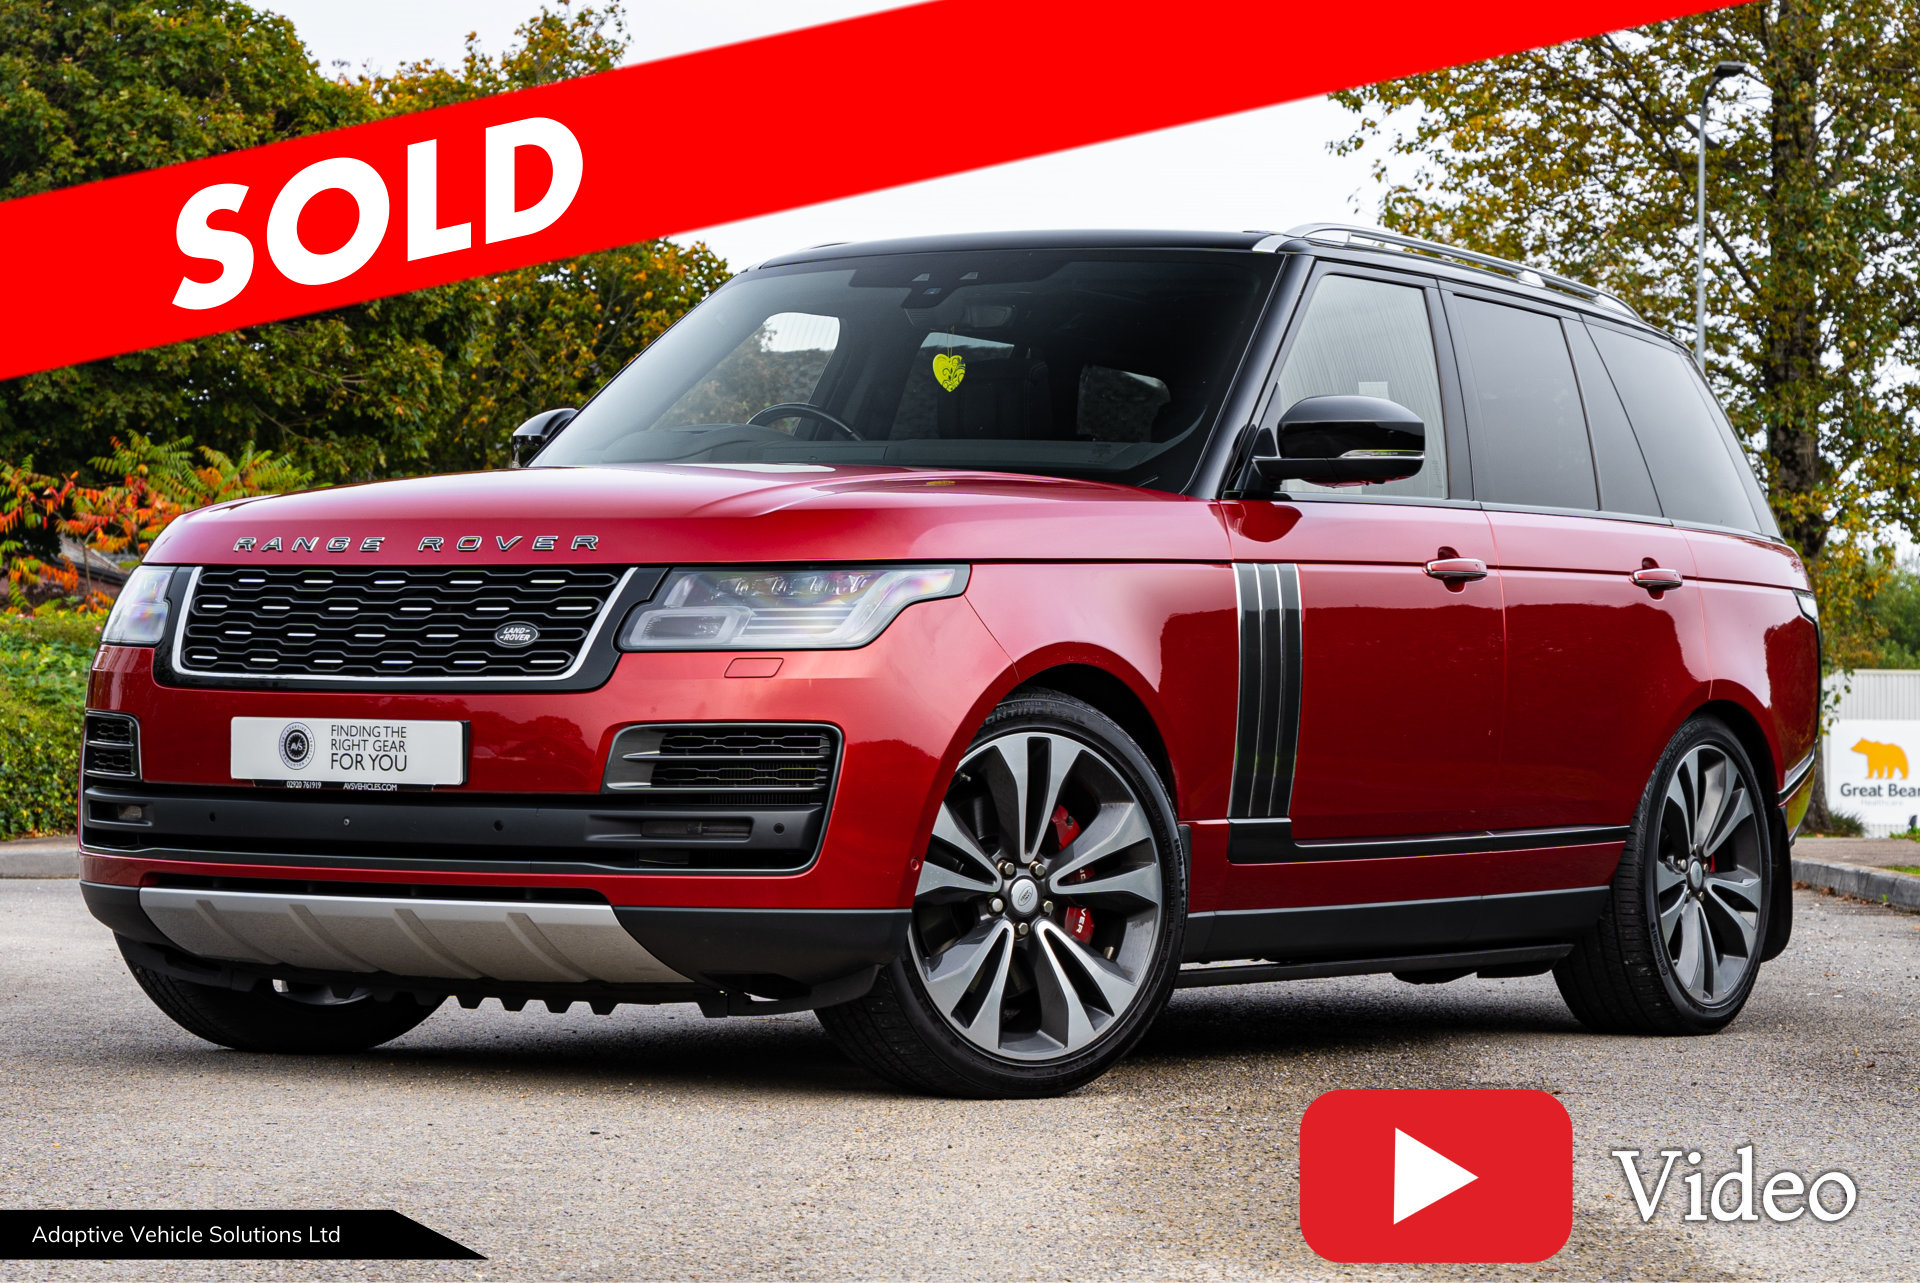 2019 Range Rover SVAutobiography Red 01 YouTube Website Sold